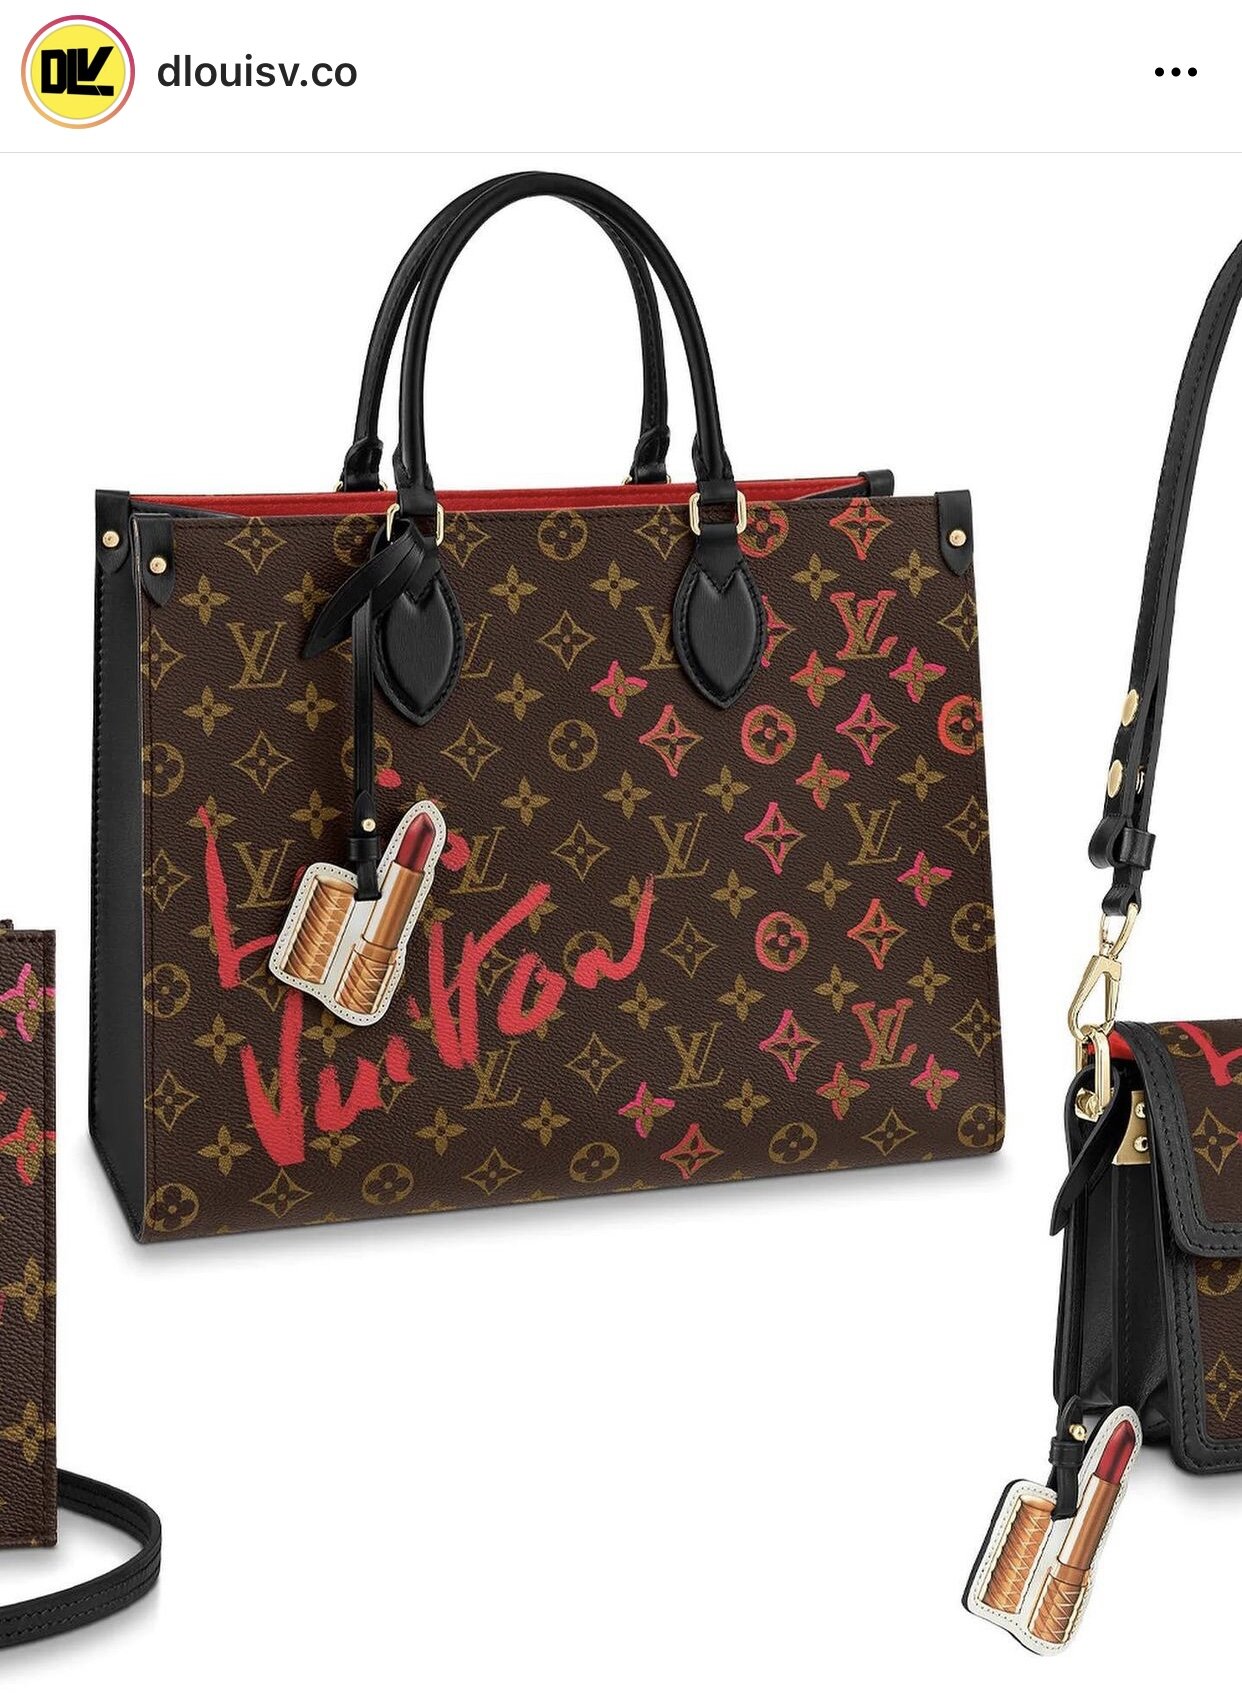 CELEBRATE VALENTINES DAY WITH LVME COLLECTION  News  LOUISVUITTON